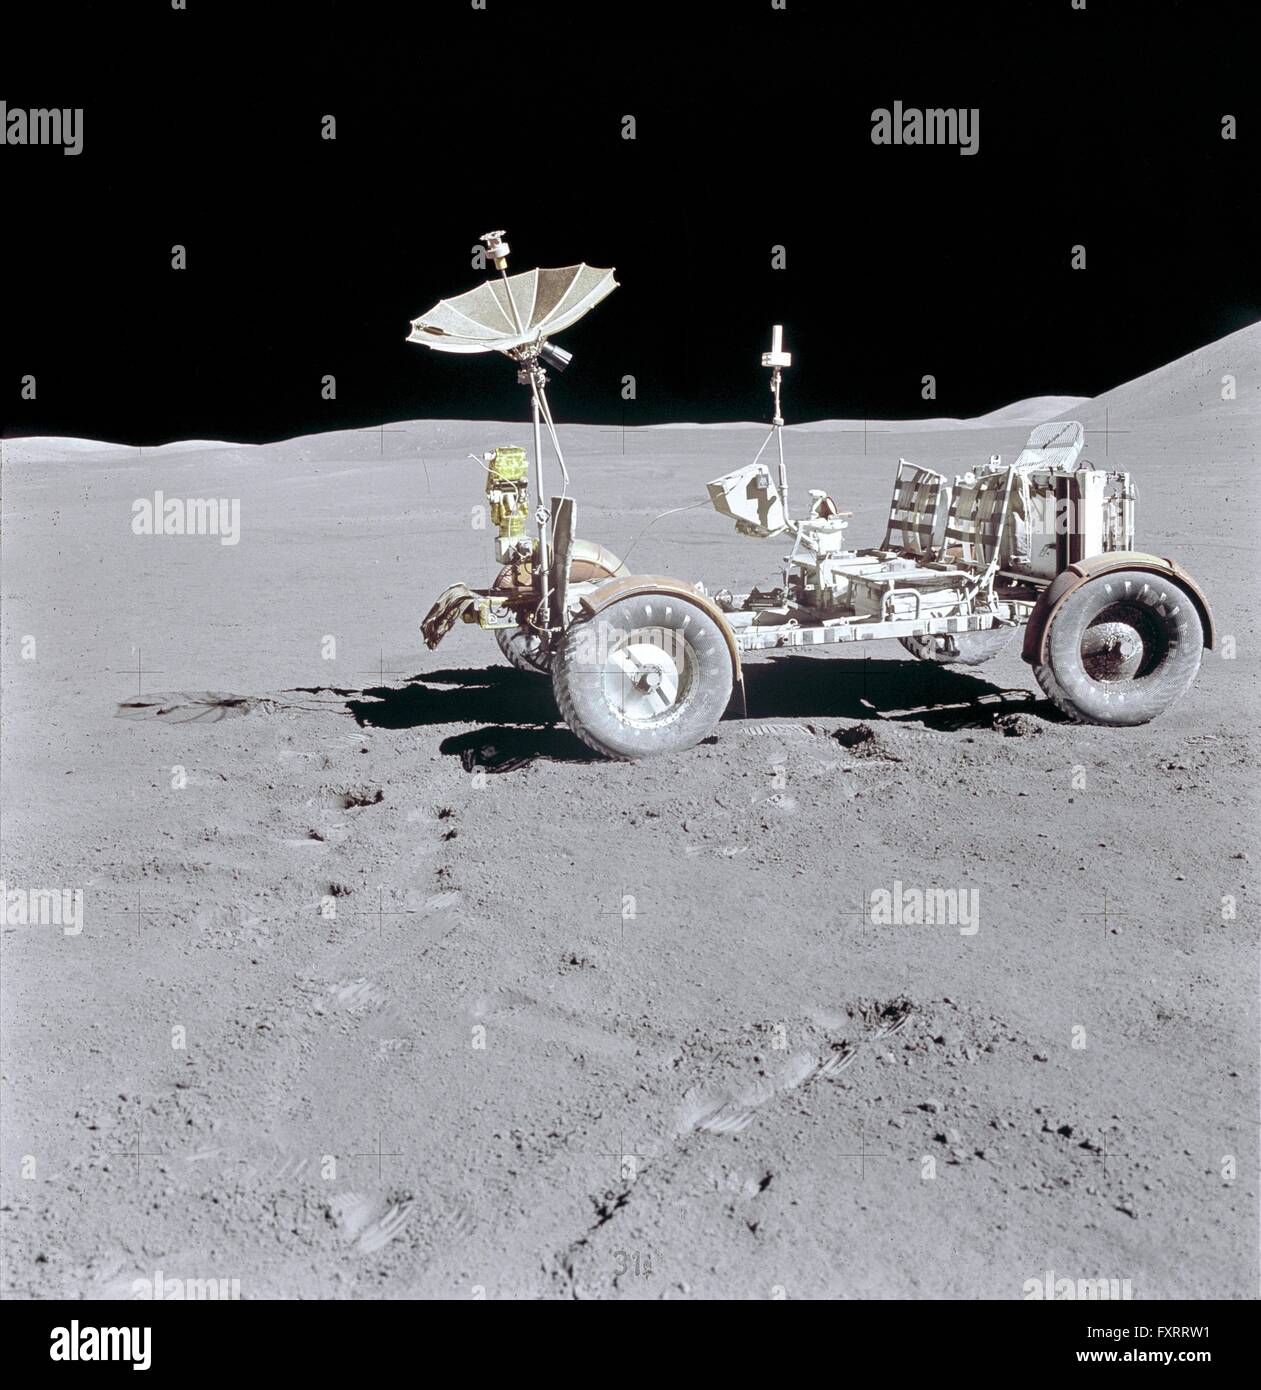 NASA Lunar Roving Vehicle is photographed alone against the lunar background during the Apollo 15 lunar surface extravehicular activity on the lunar surface August 1, 1971 in Hadley-Apennine, Moon. Stock Photo